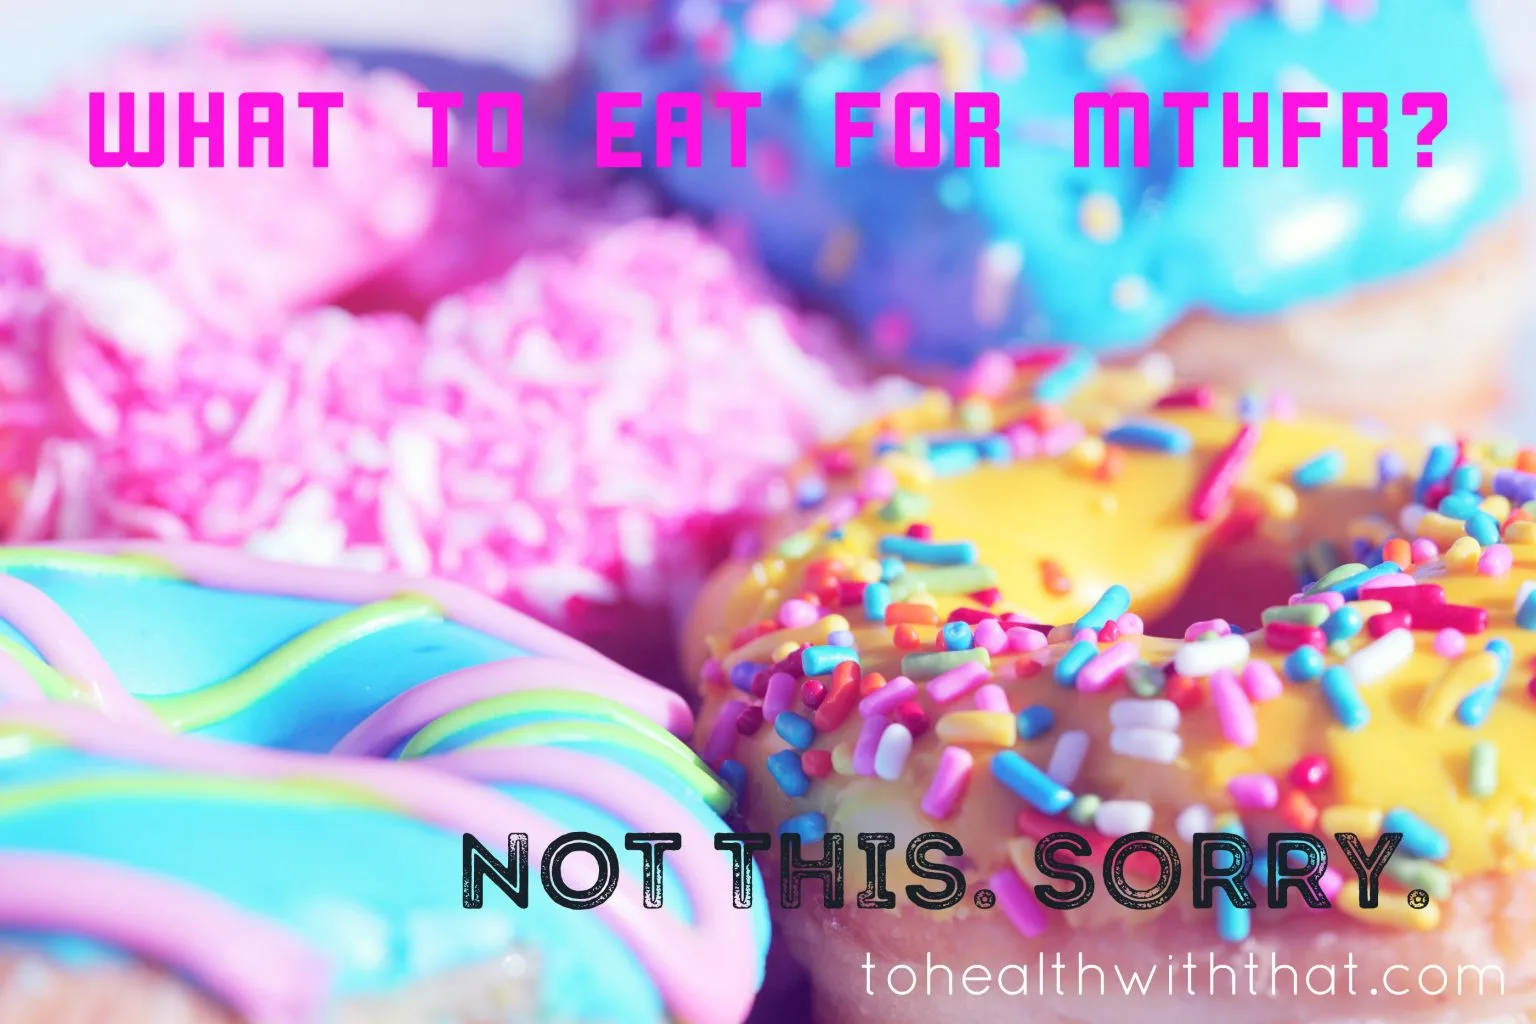 It is definitely not the doughnuts that you should eat if you suffer from MTHFR.